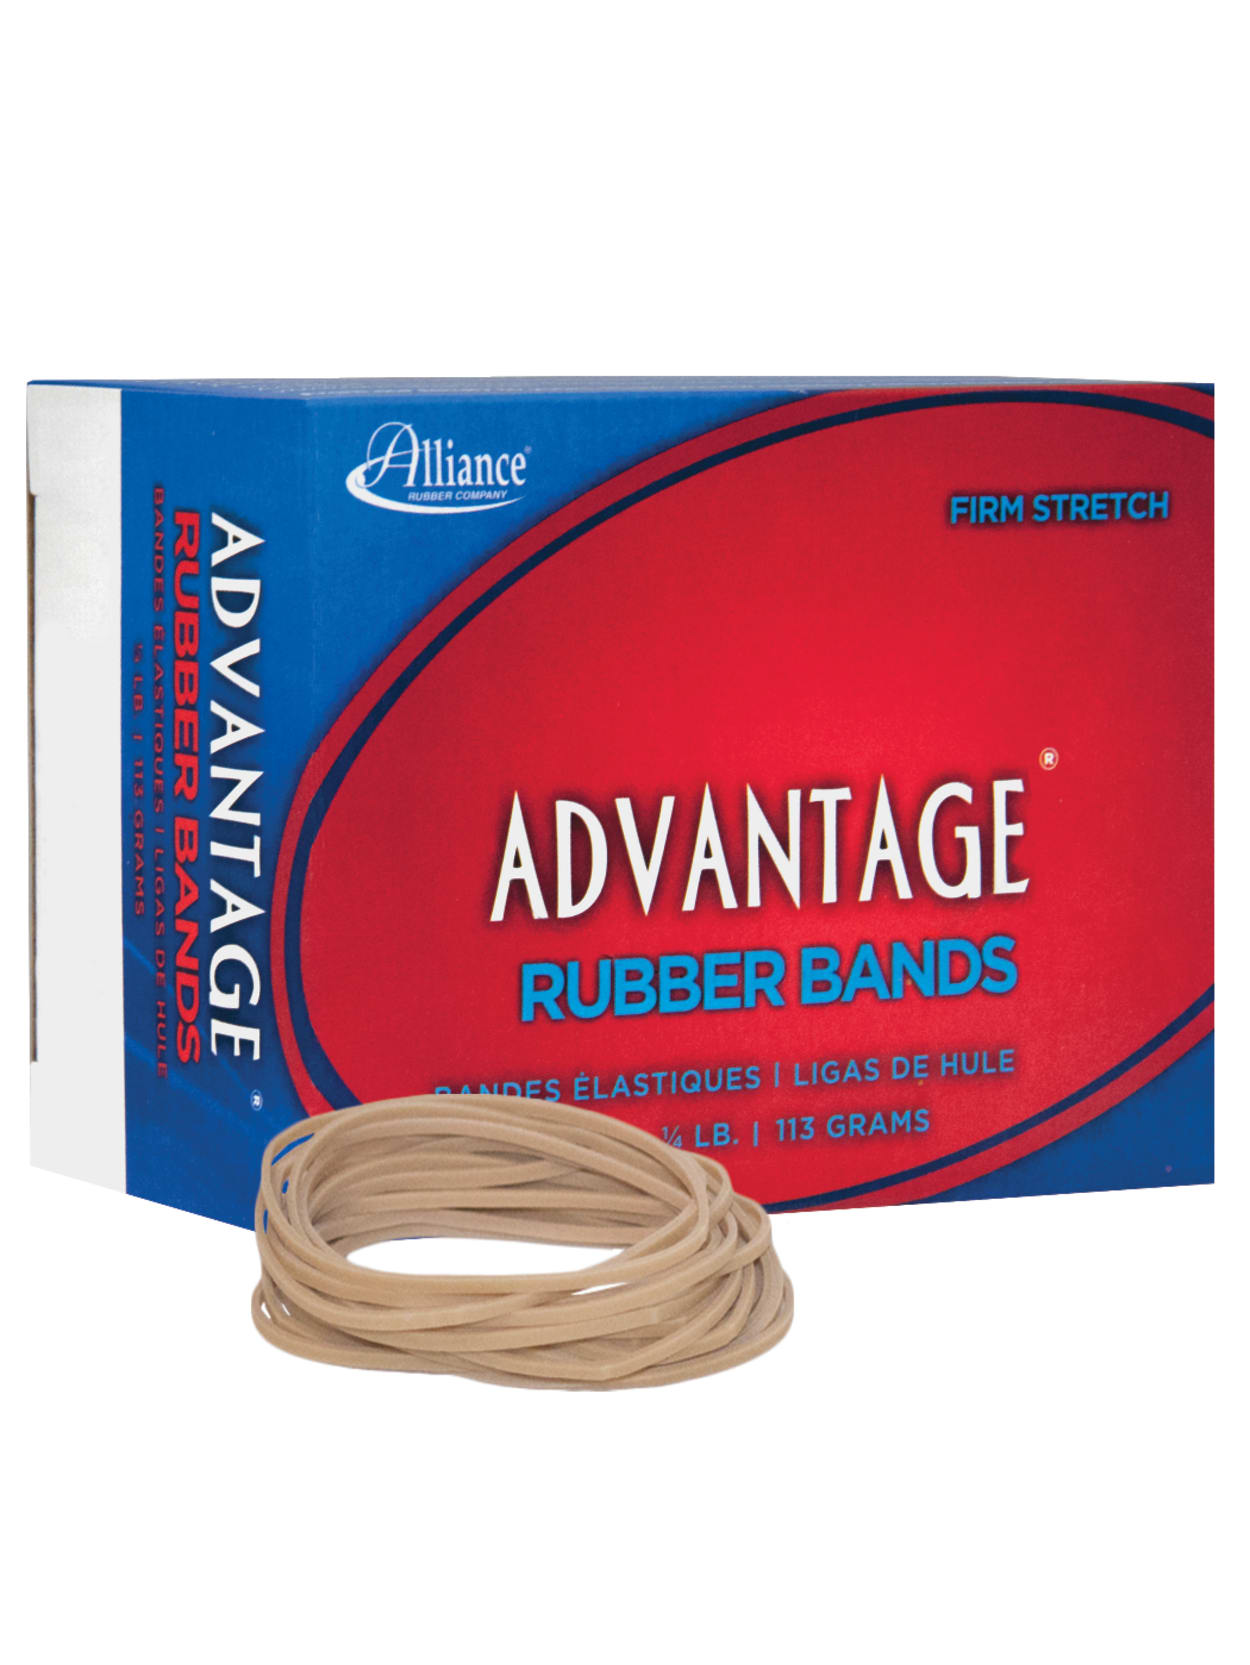 size 18 rubber bands